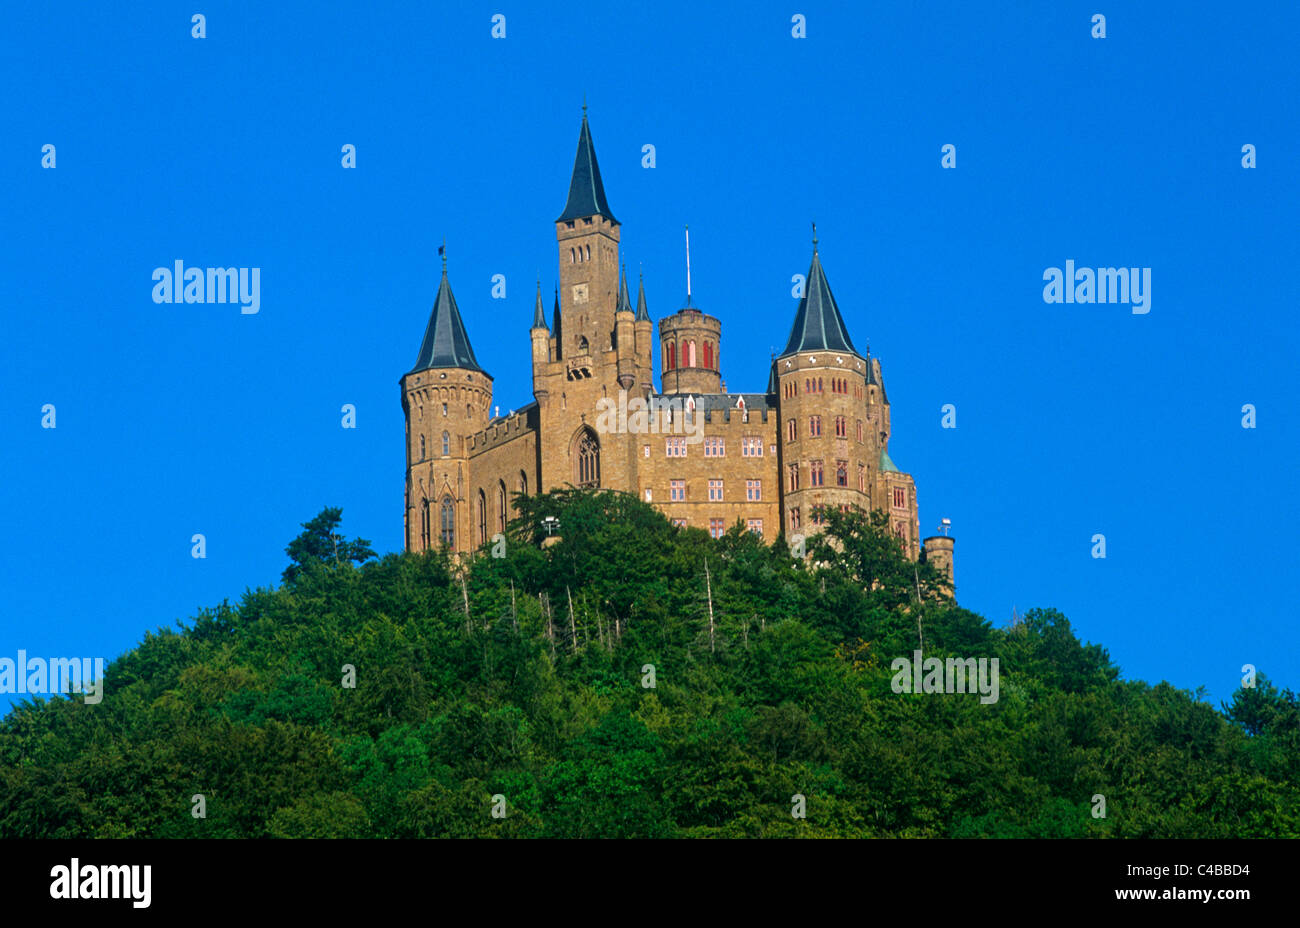 Germany, Baden-Wurttemberg, Swabia, Hechingen. Situated in the foothills of the Swabian Alps, Hohenzollern Castle was the medieval ancestral seat of the Hohenzollerns who became Germany's emperors. The existing castle was built in the mid-1800s for Frederick William IV of Prussia. Stock Photo